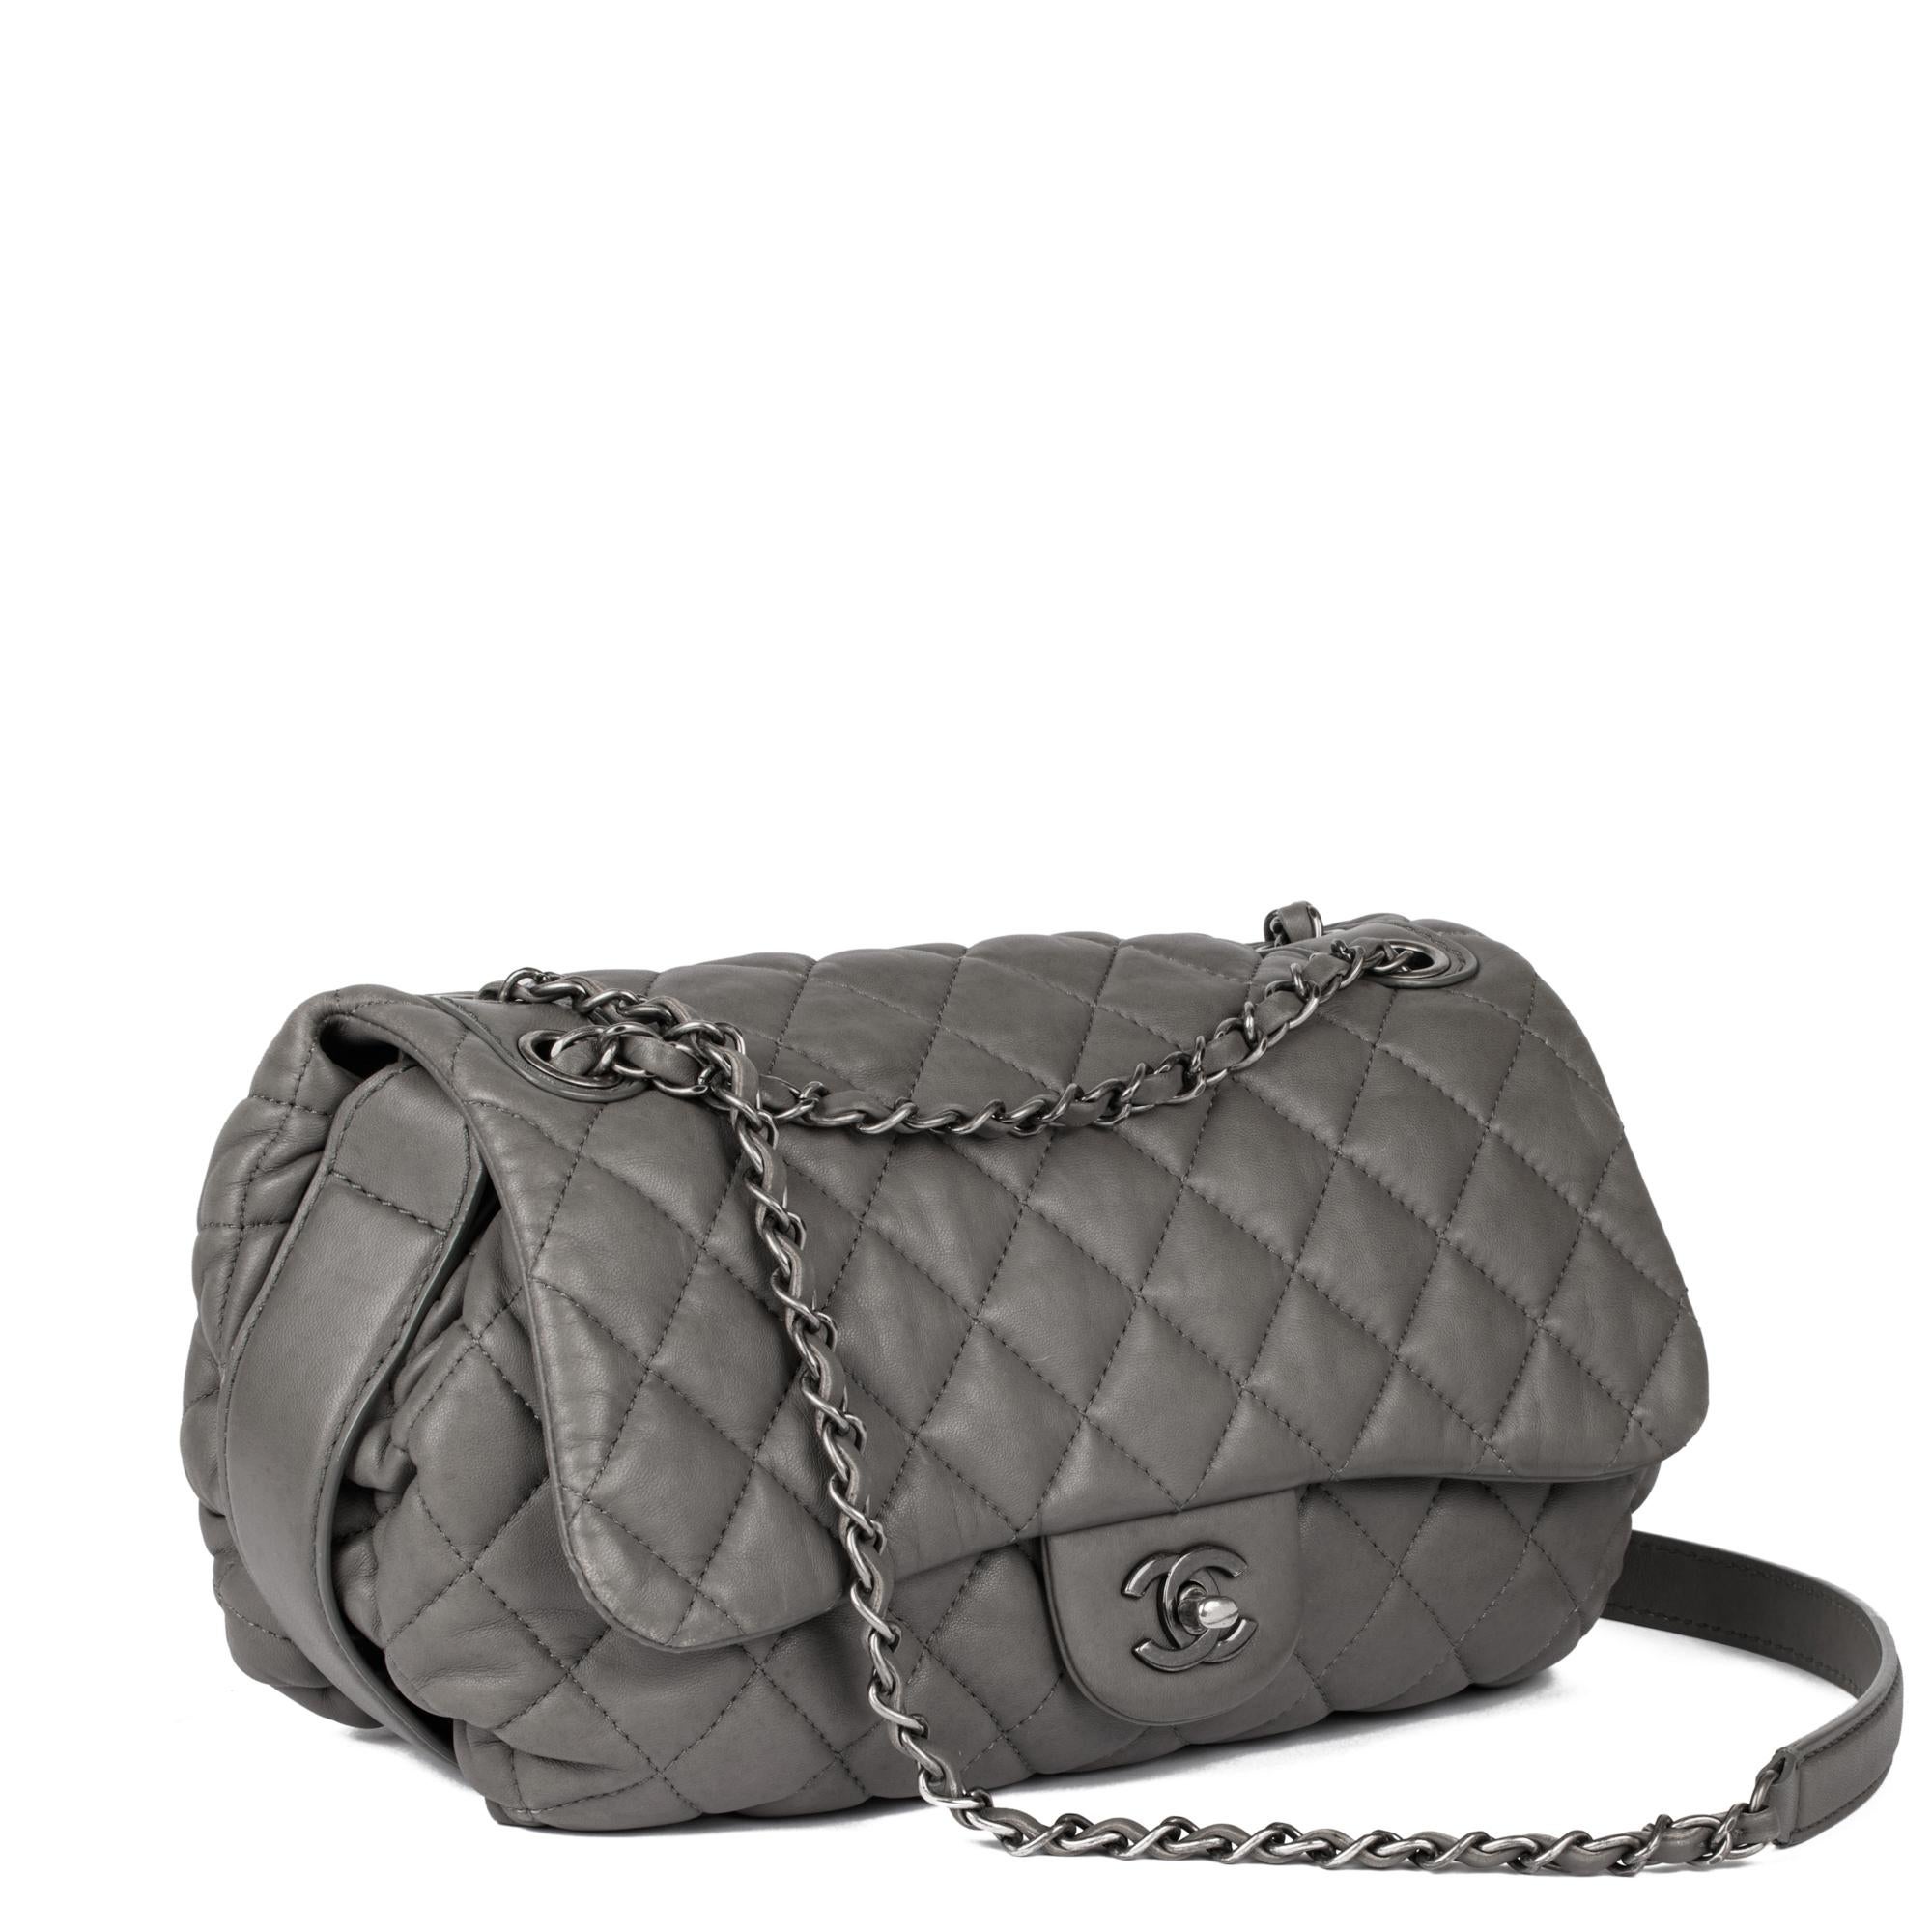 CHANEL
Grey Quilted Lambskin Classic Single Flap Bag

Xupes Reference: HB5151
Serial Number: 18535324
Age (Circa): 2014
Accompanied By: Chanel Dust Bag, Authenticity Card
Authenticity Details: Date Stamp (Made in Italy)
Gender: Ladies
Type: